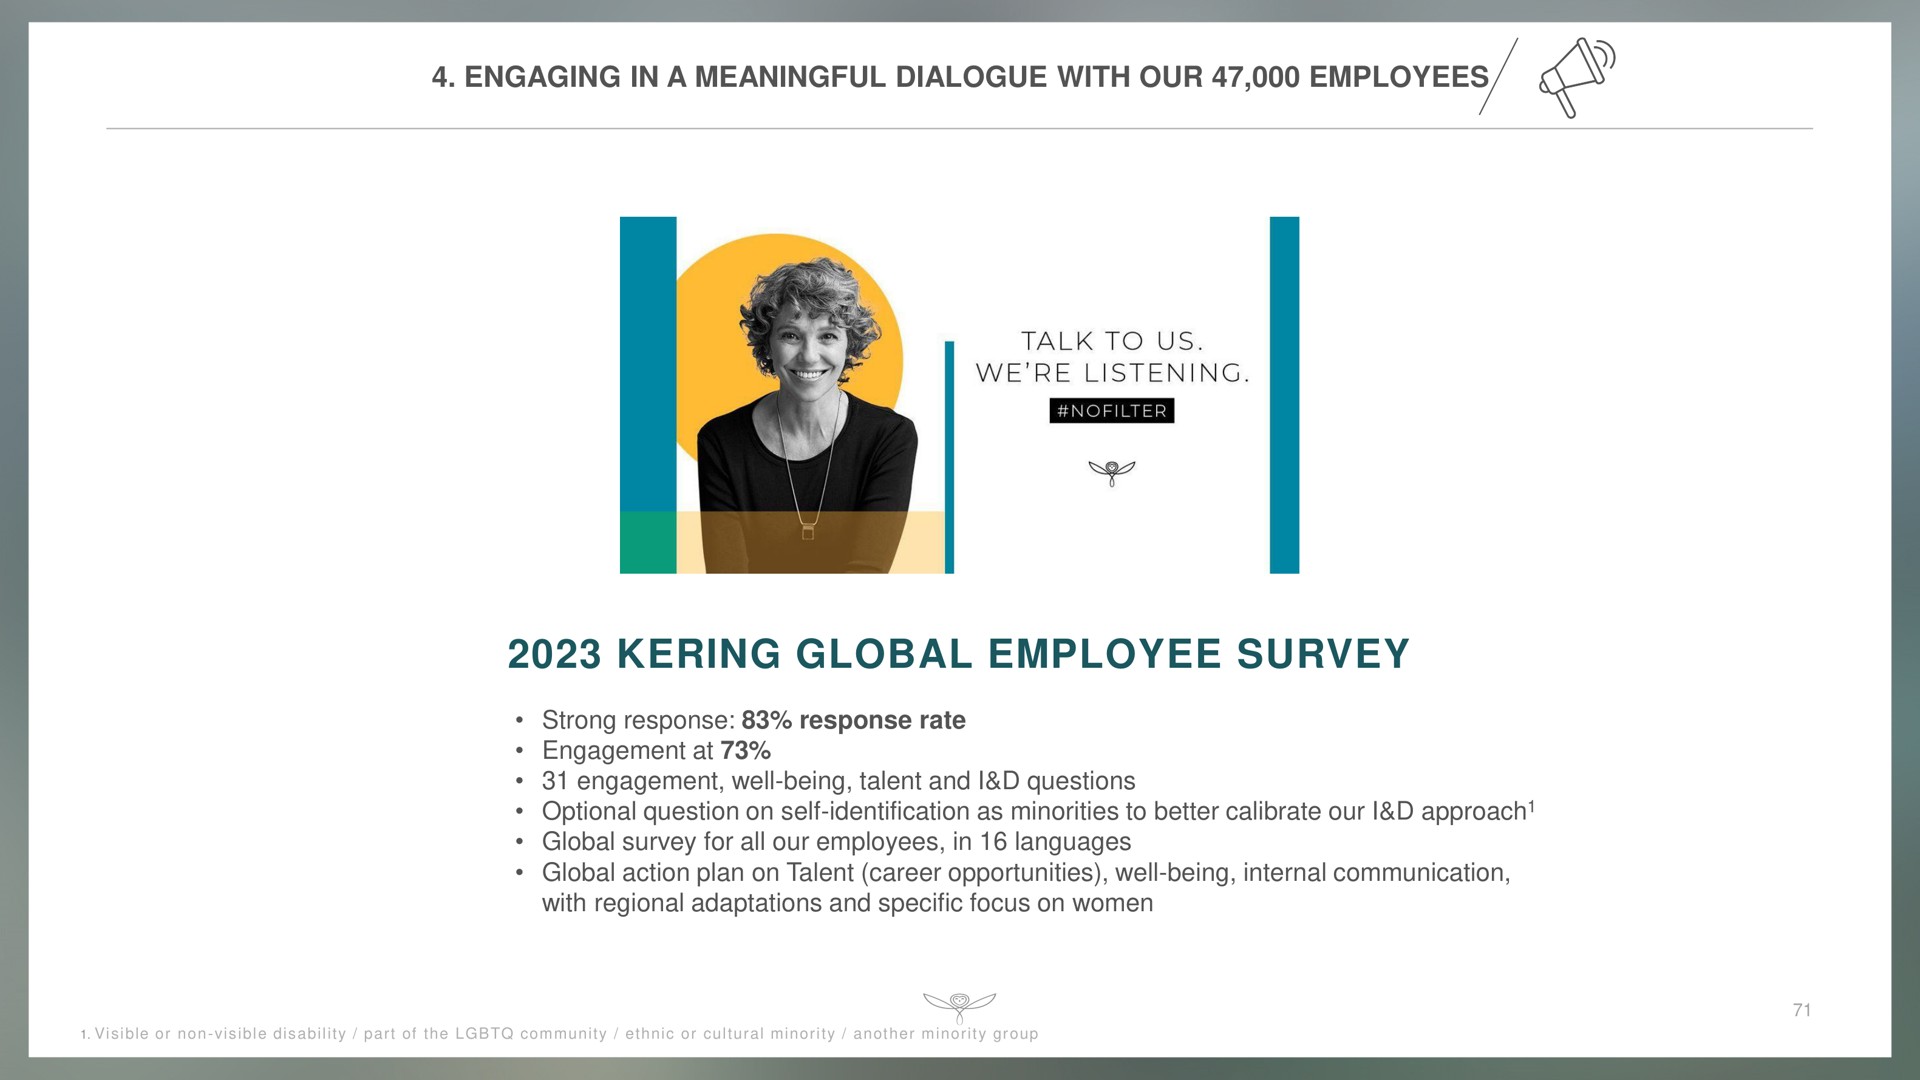 engaging in a meaningful dialogue with our employees global employee survey strong response response rate engagement at engagement well being talent and i questions optional question on self identification as minorities to better calibrate our i approach global survey for all our employees in languages global action plan on talent career opportunities well being internal communication with regional adaptations and specific focus on women talk us we listening approach | Kering